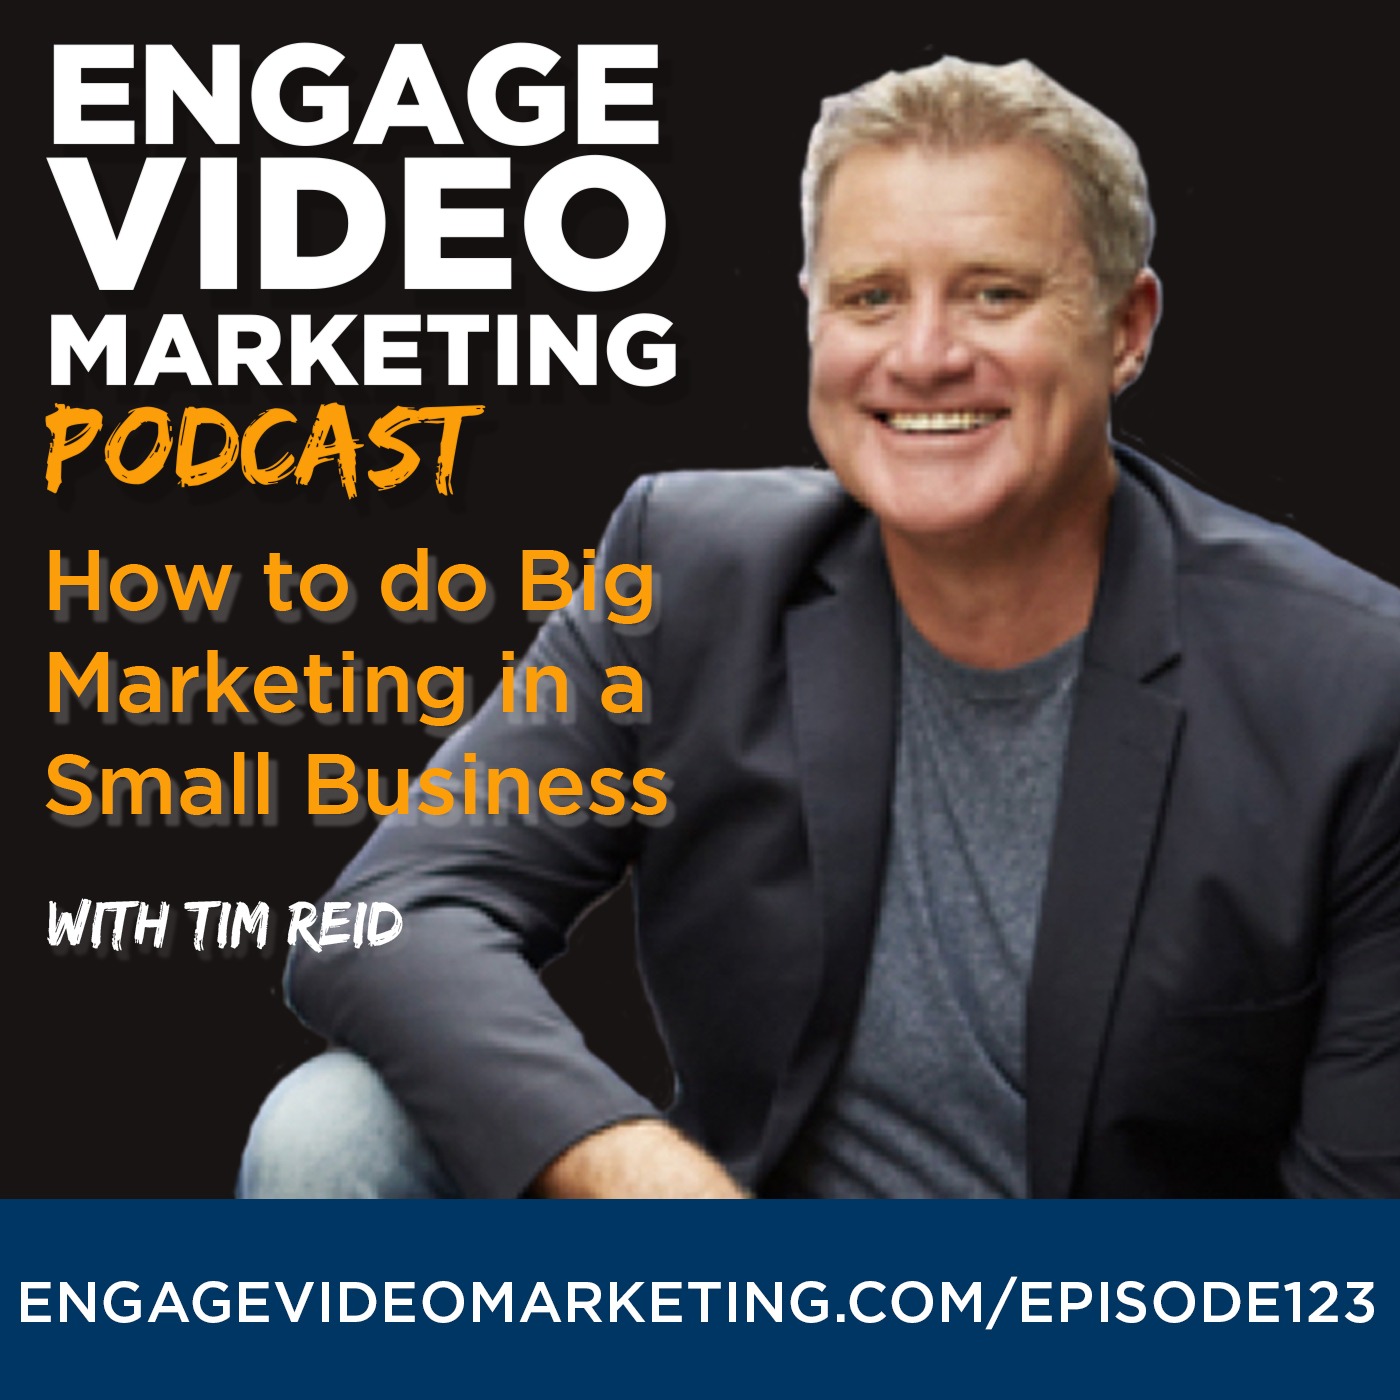 How to Do Big Marketing in a Small Business with Tim Reid